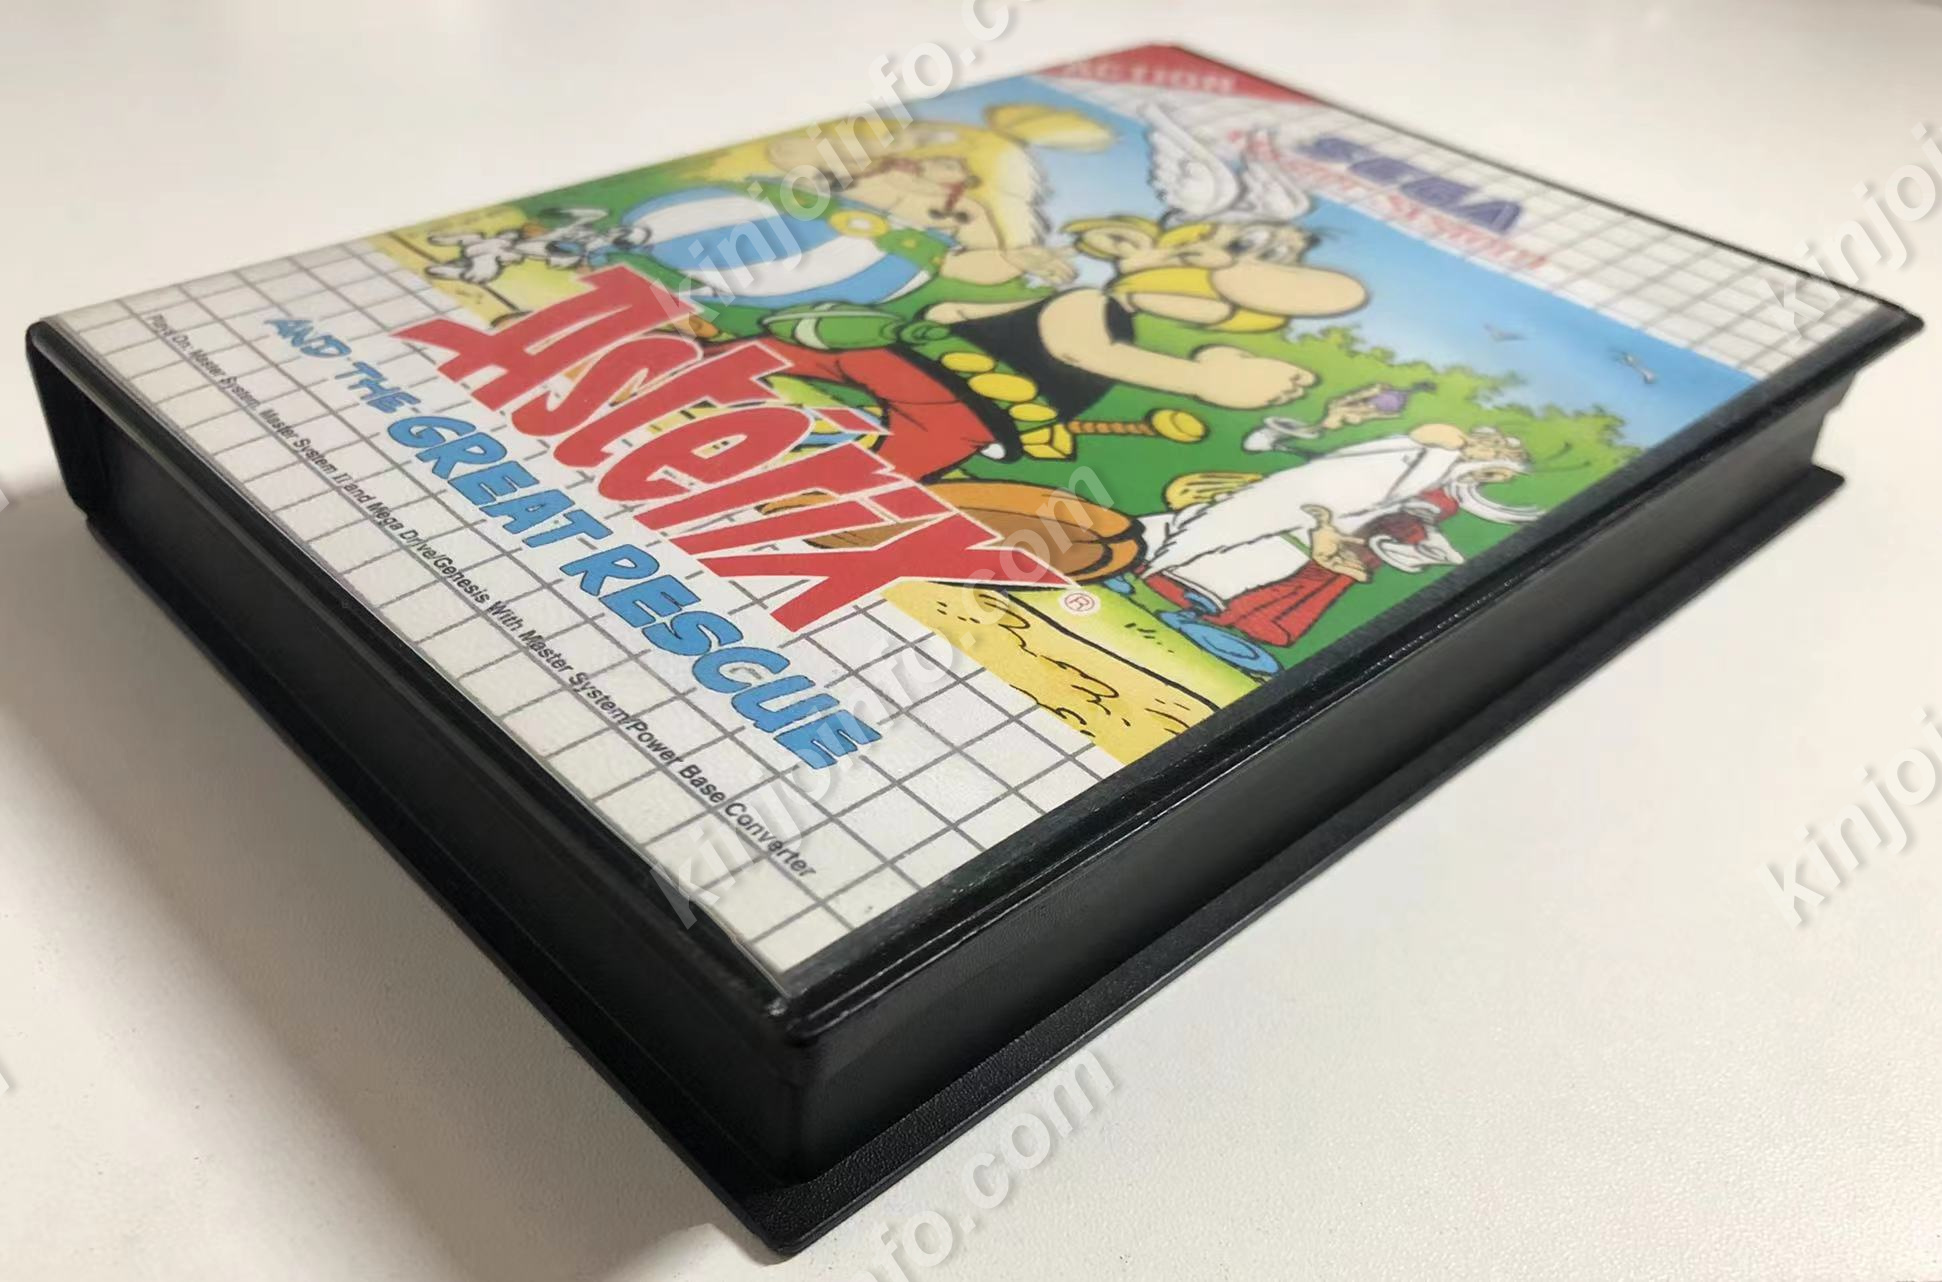 Asterix and the Great Rescue【中古美品・SMS欧州版】 / kinjoinfo